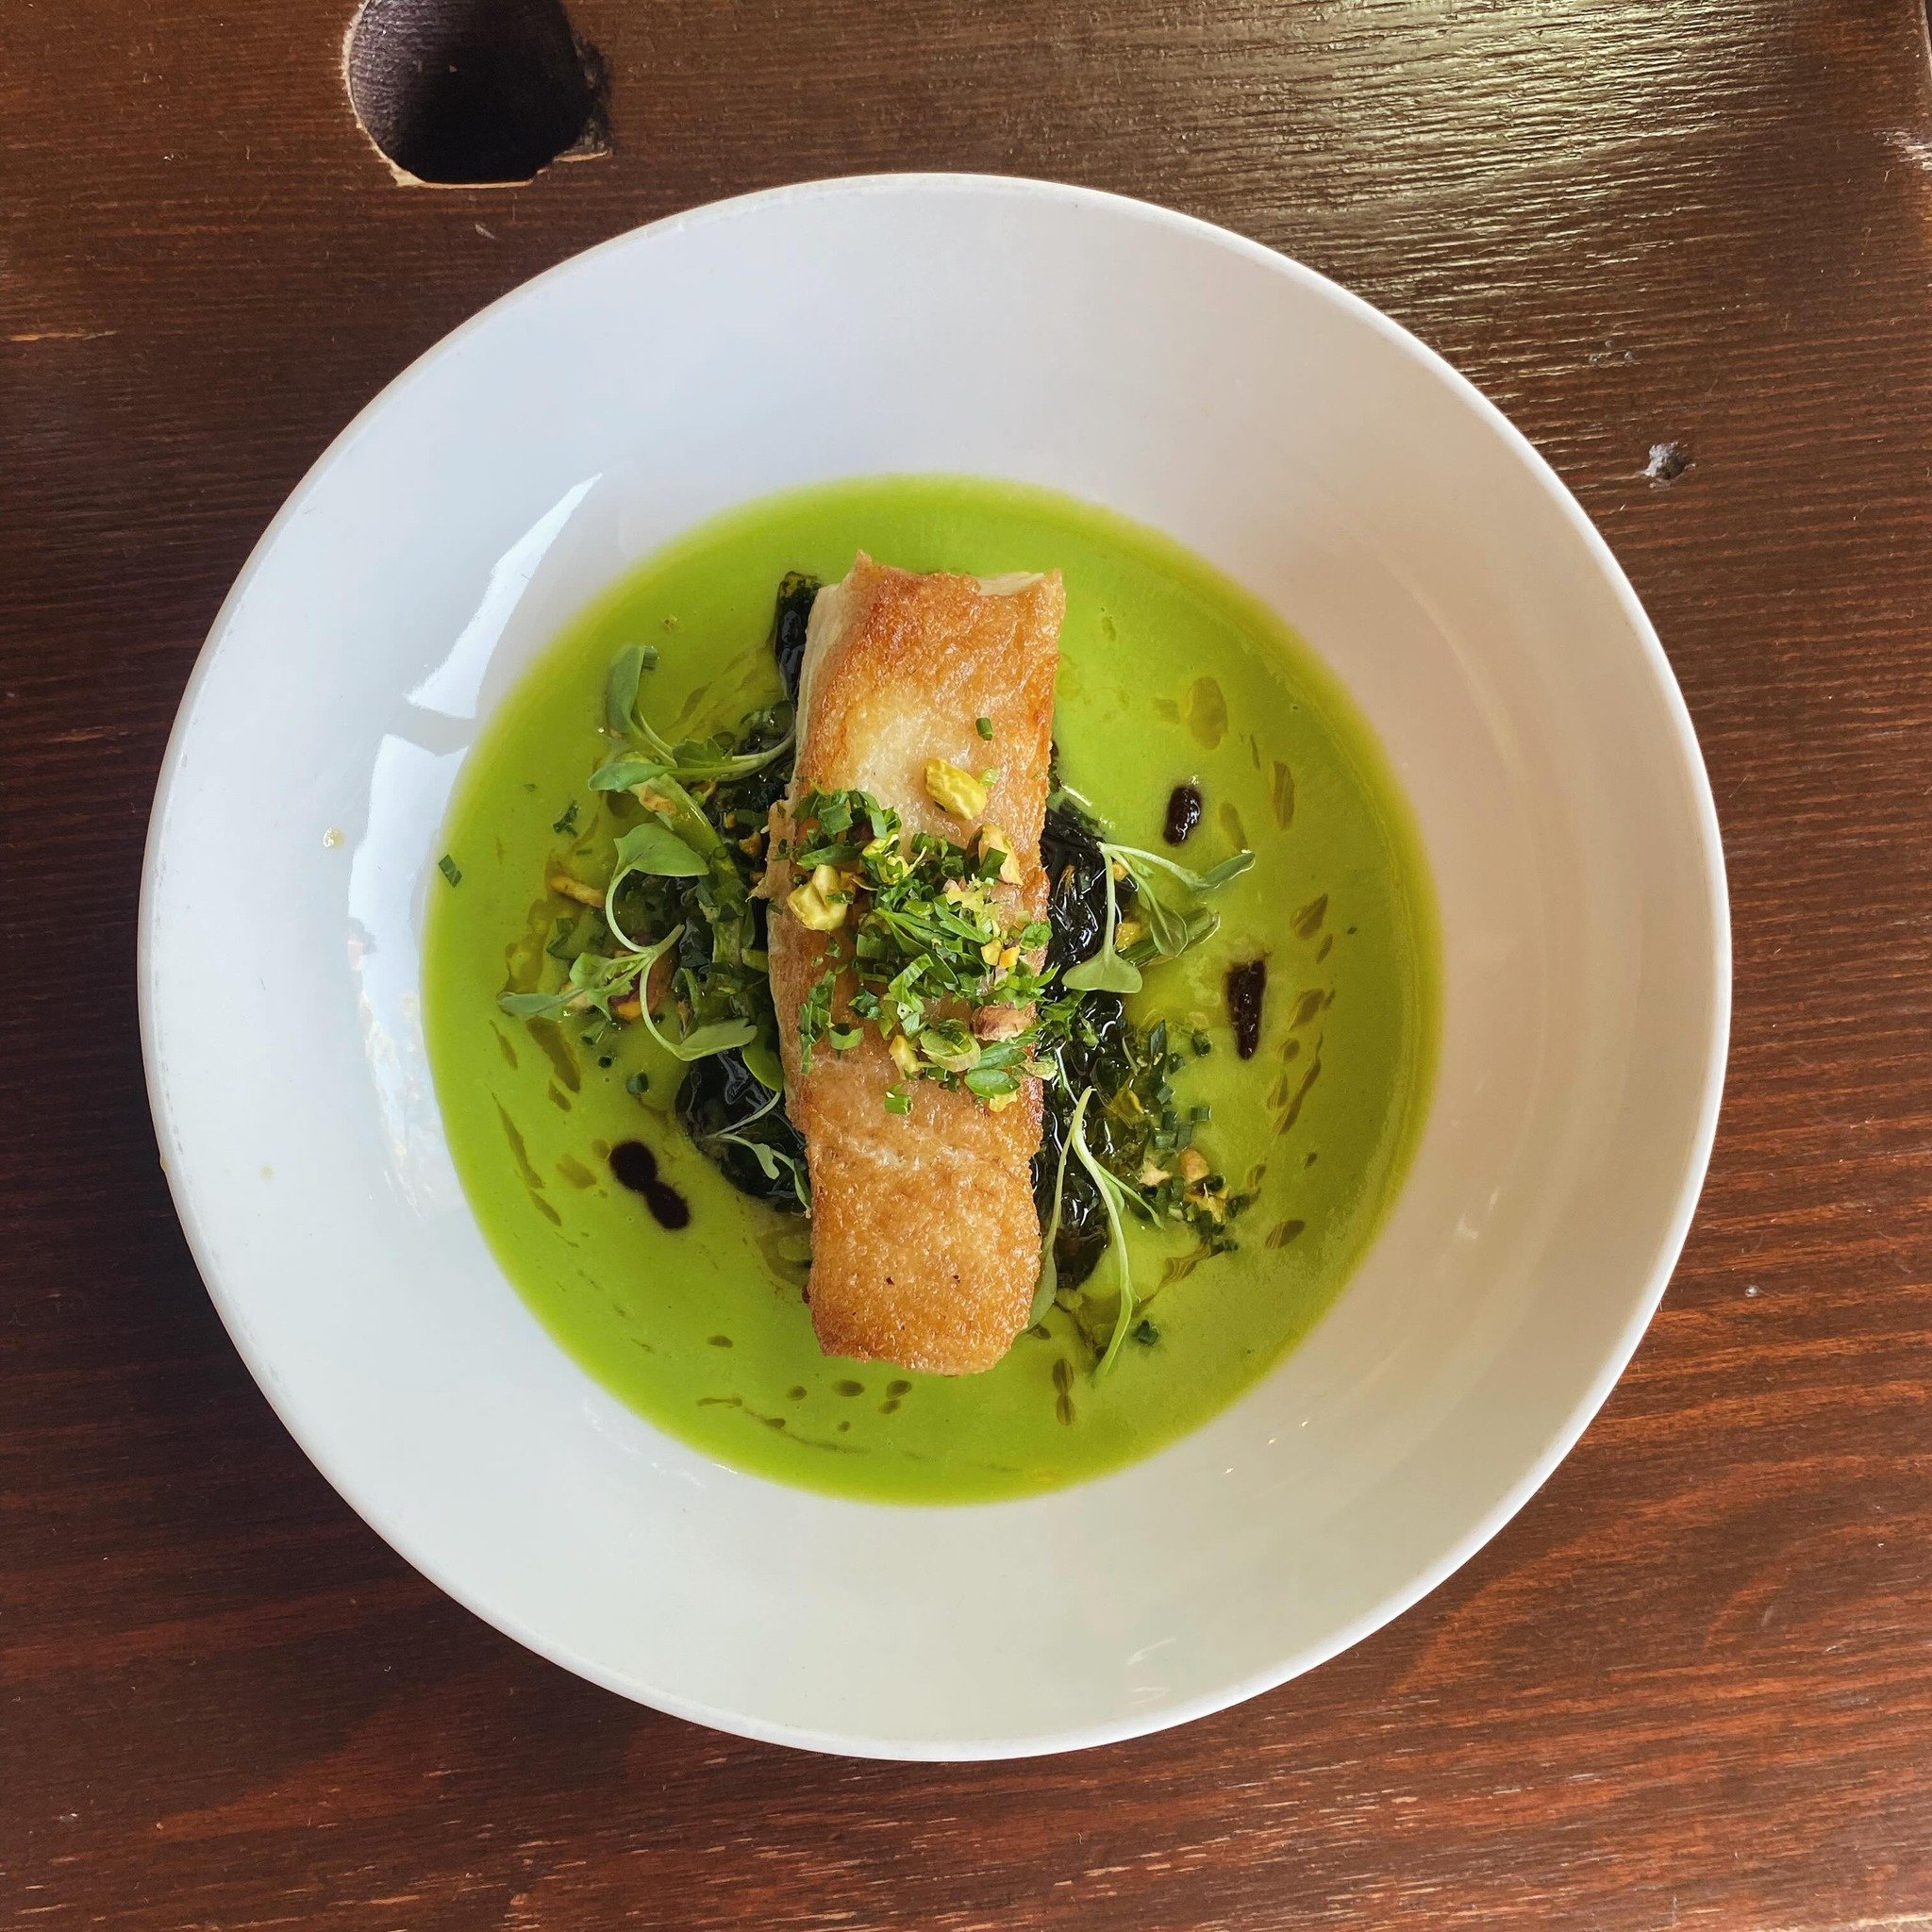 It&rsquo;s the weekend and we have something special for you! Stunning pan seared halibut, pea vine beurre blanc, pea vines and a pistachio gremolata. Chef Donny &amp; Chef Angel are happy to be reunited and working up magic in the kitchen!